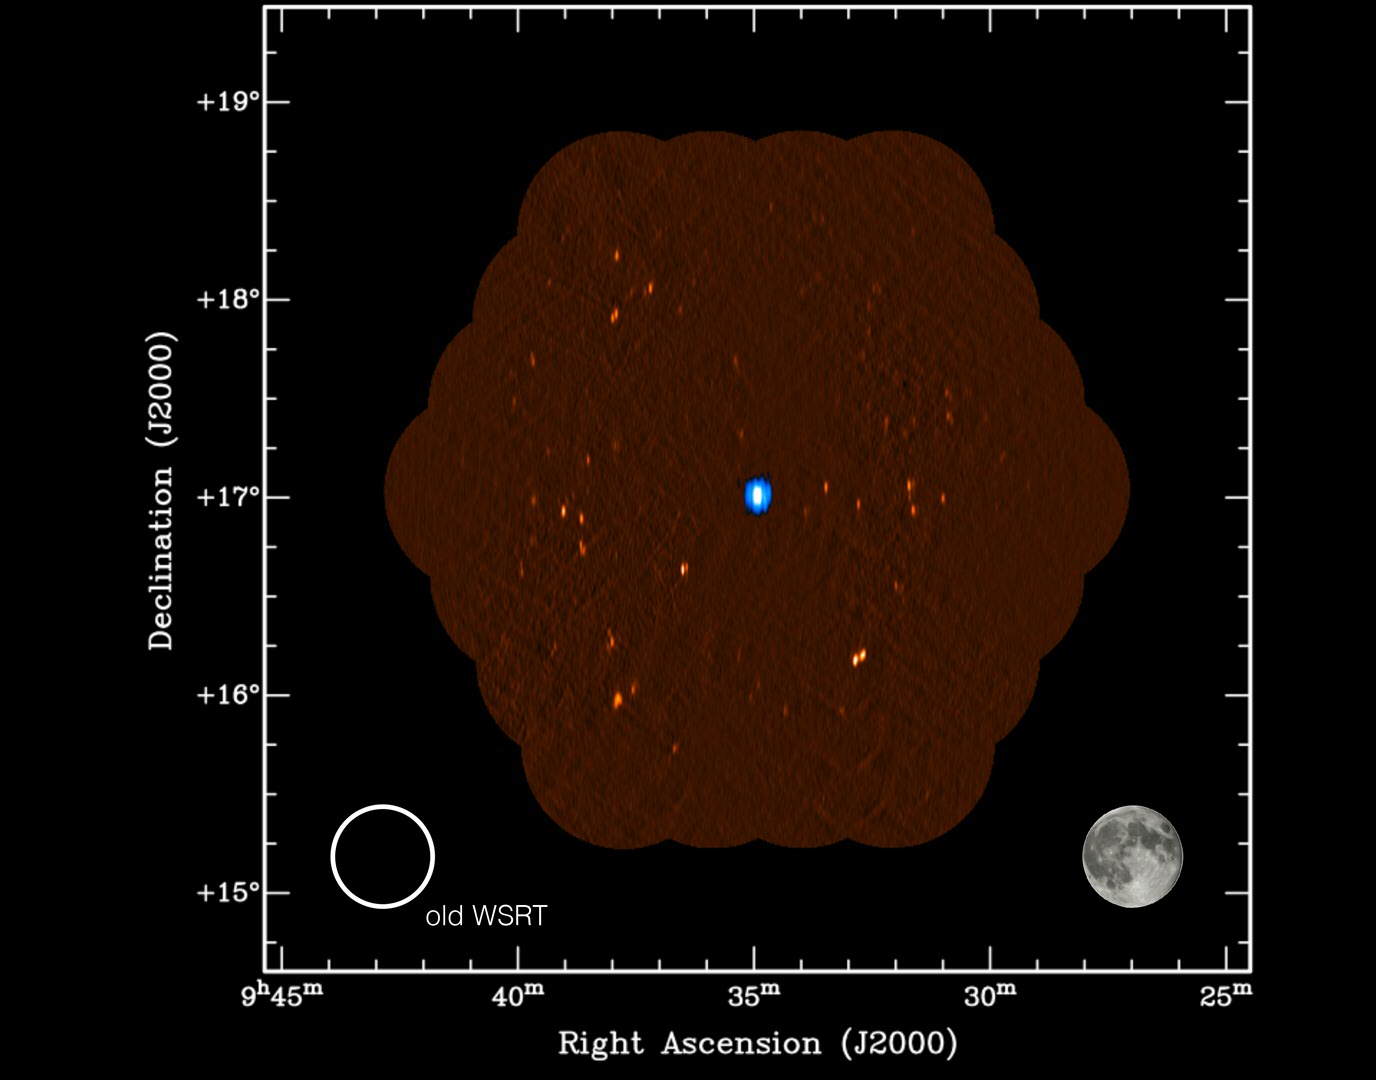 Colour-coded image made with the Westerbork/Apertif system showing the dwarf galaxy Leo T shown in blue in the middle, with many distant radio galaxies shown in orange in the background. For comparison we show the field-of-view of the “old” Westerbork telescope in the bottom-left and the size of the full moon on the sky in the bottom right. Apertif can image an area about 40 times larger than the full moon in a single observation. (Credit: Oosterloo/Hut/Apertif Commissioning Team)